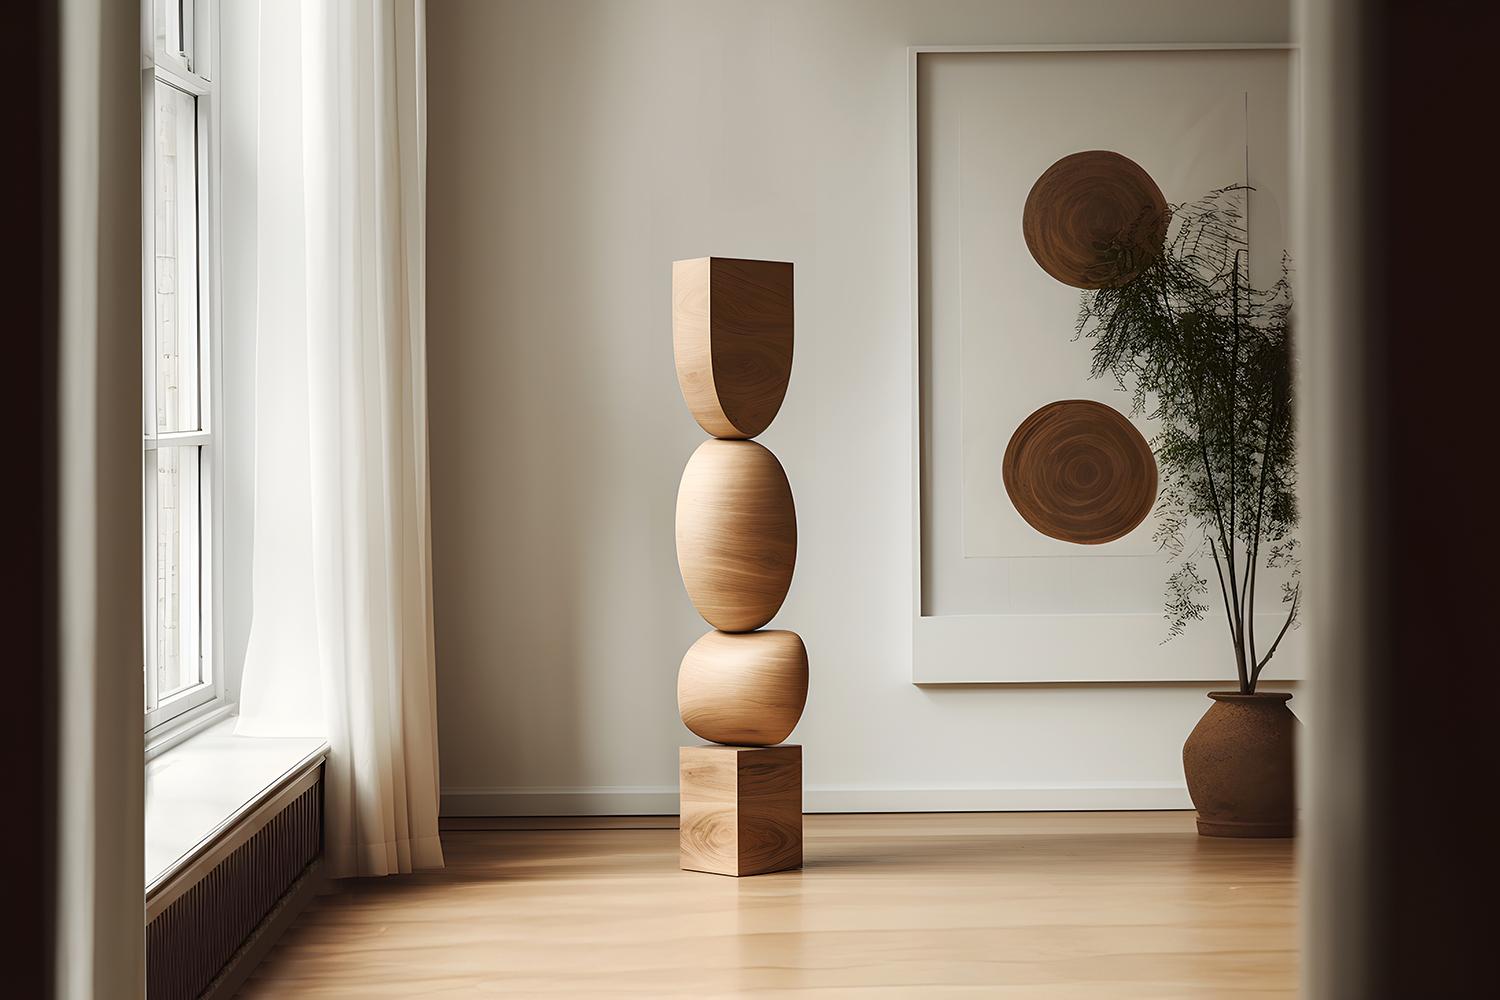 Mid-Century Modern Still Stand No25: Handcrafted Walnut Serenity Totem by Joel Escalona For Sale